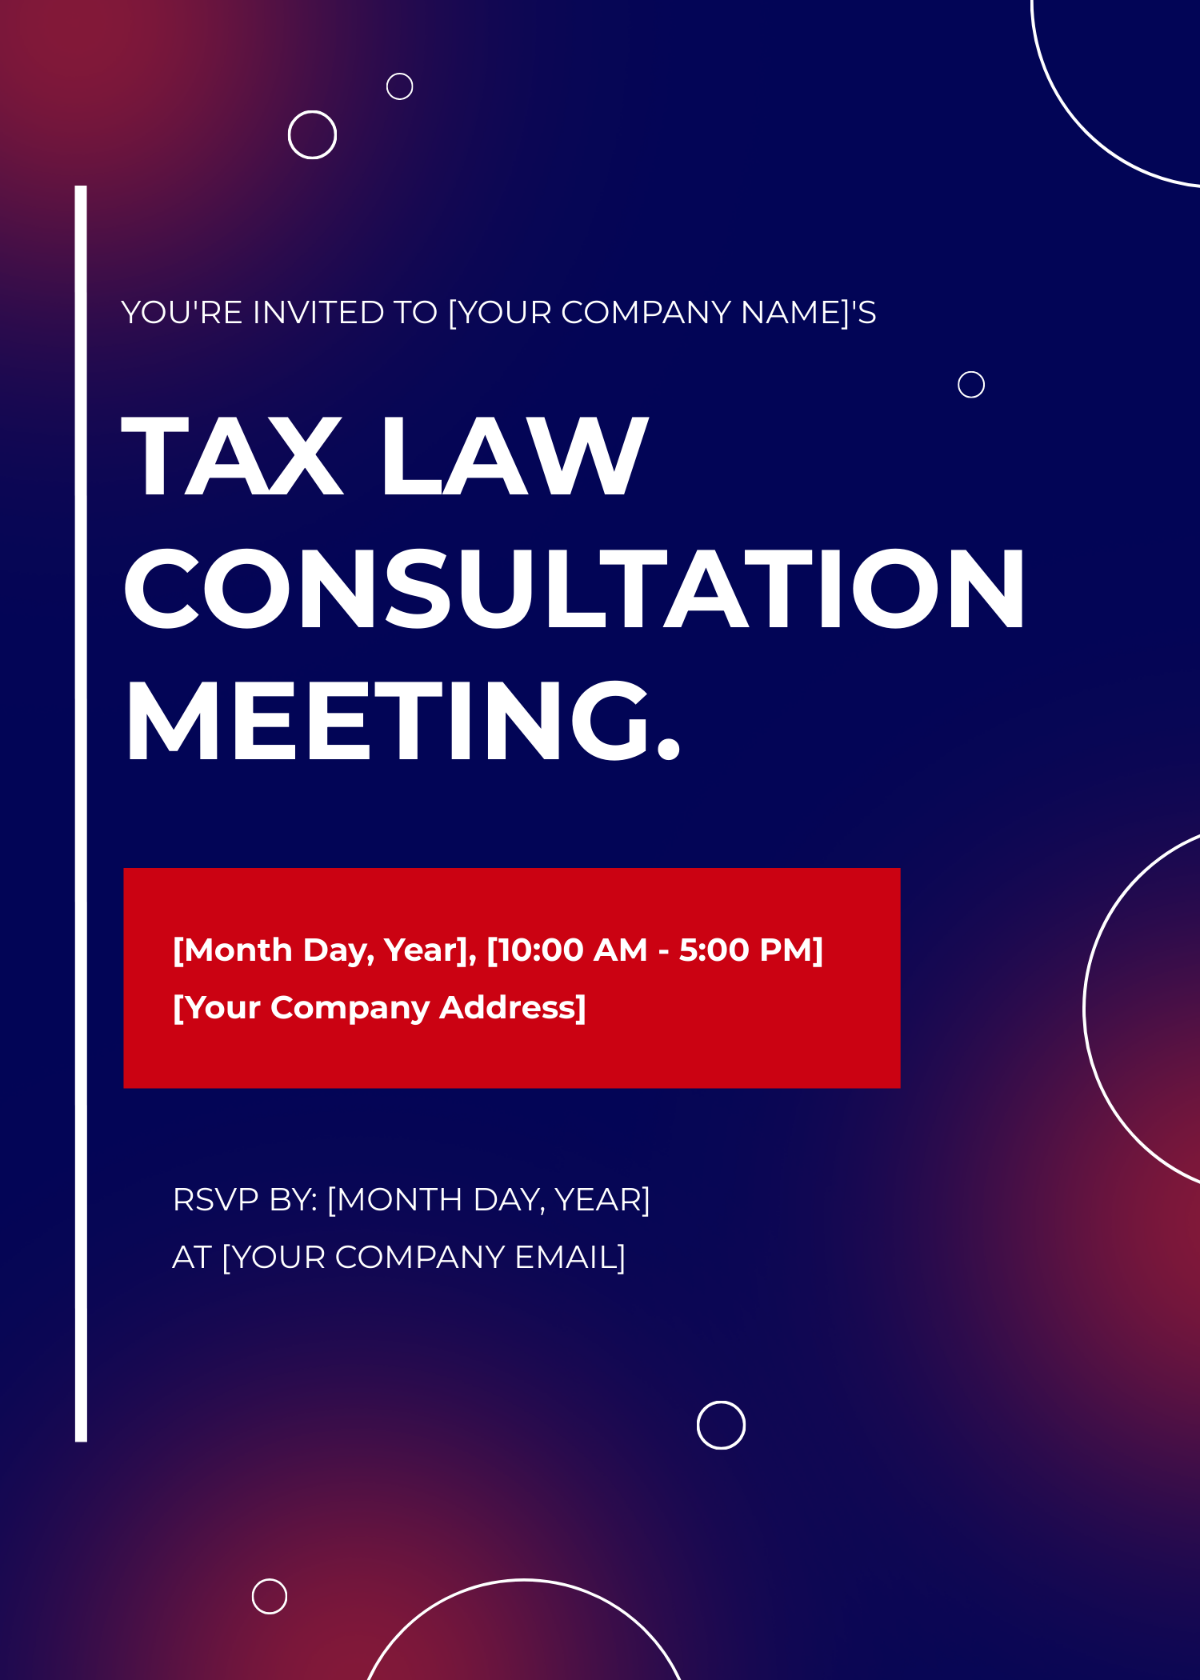 Tax Law Consultation Meeting Invitation Card Template